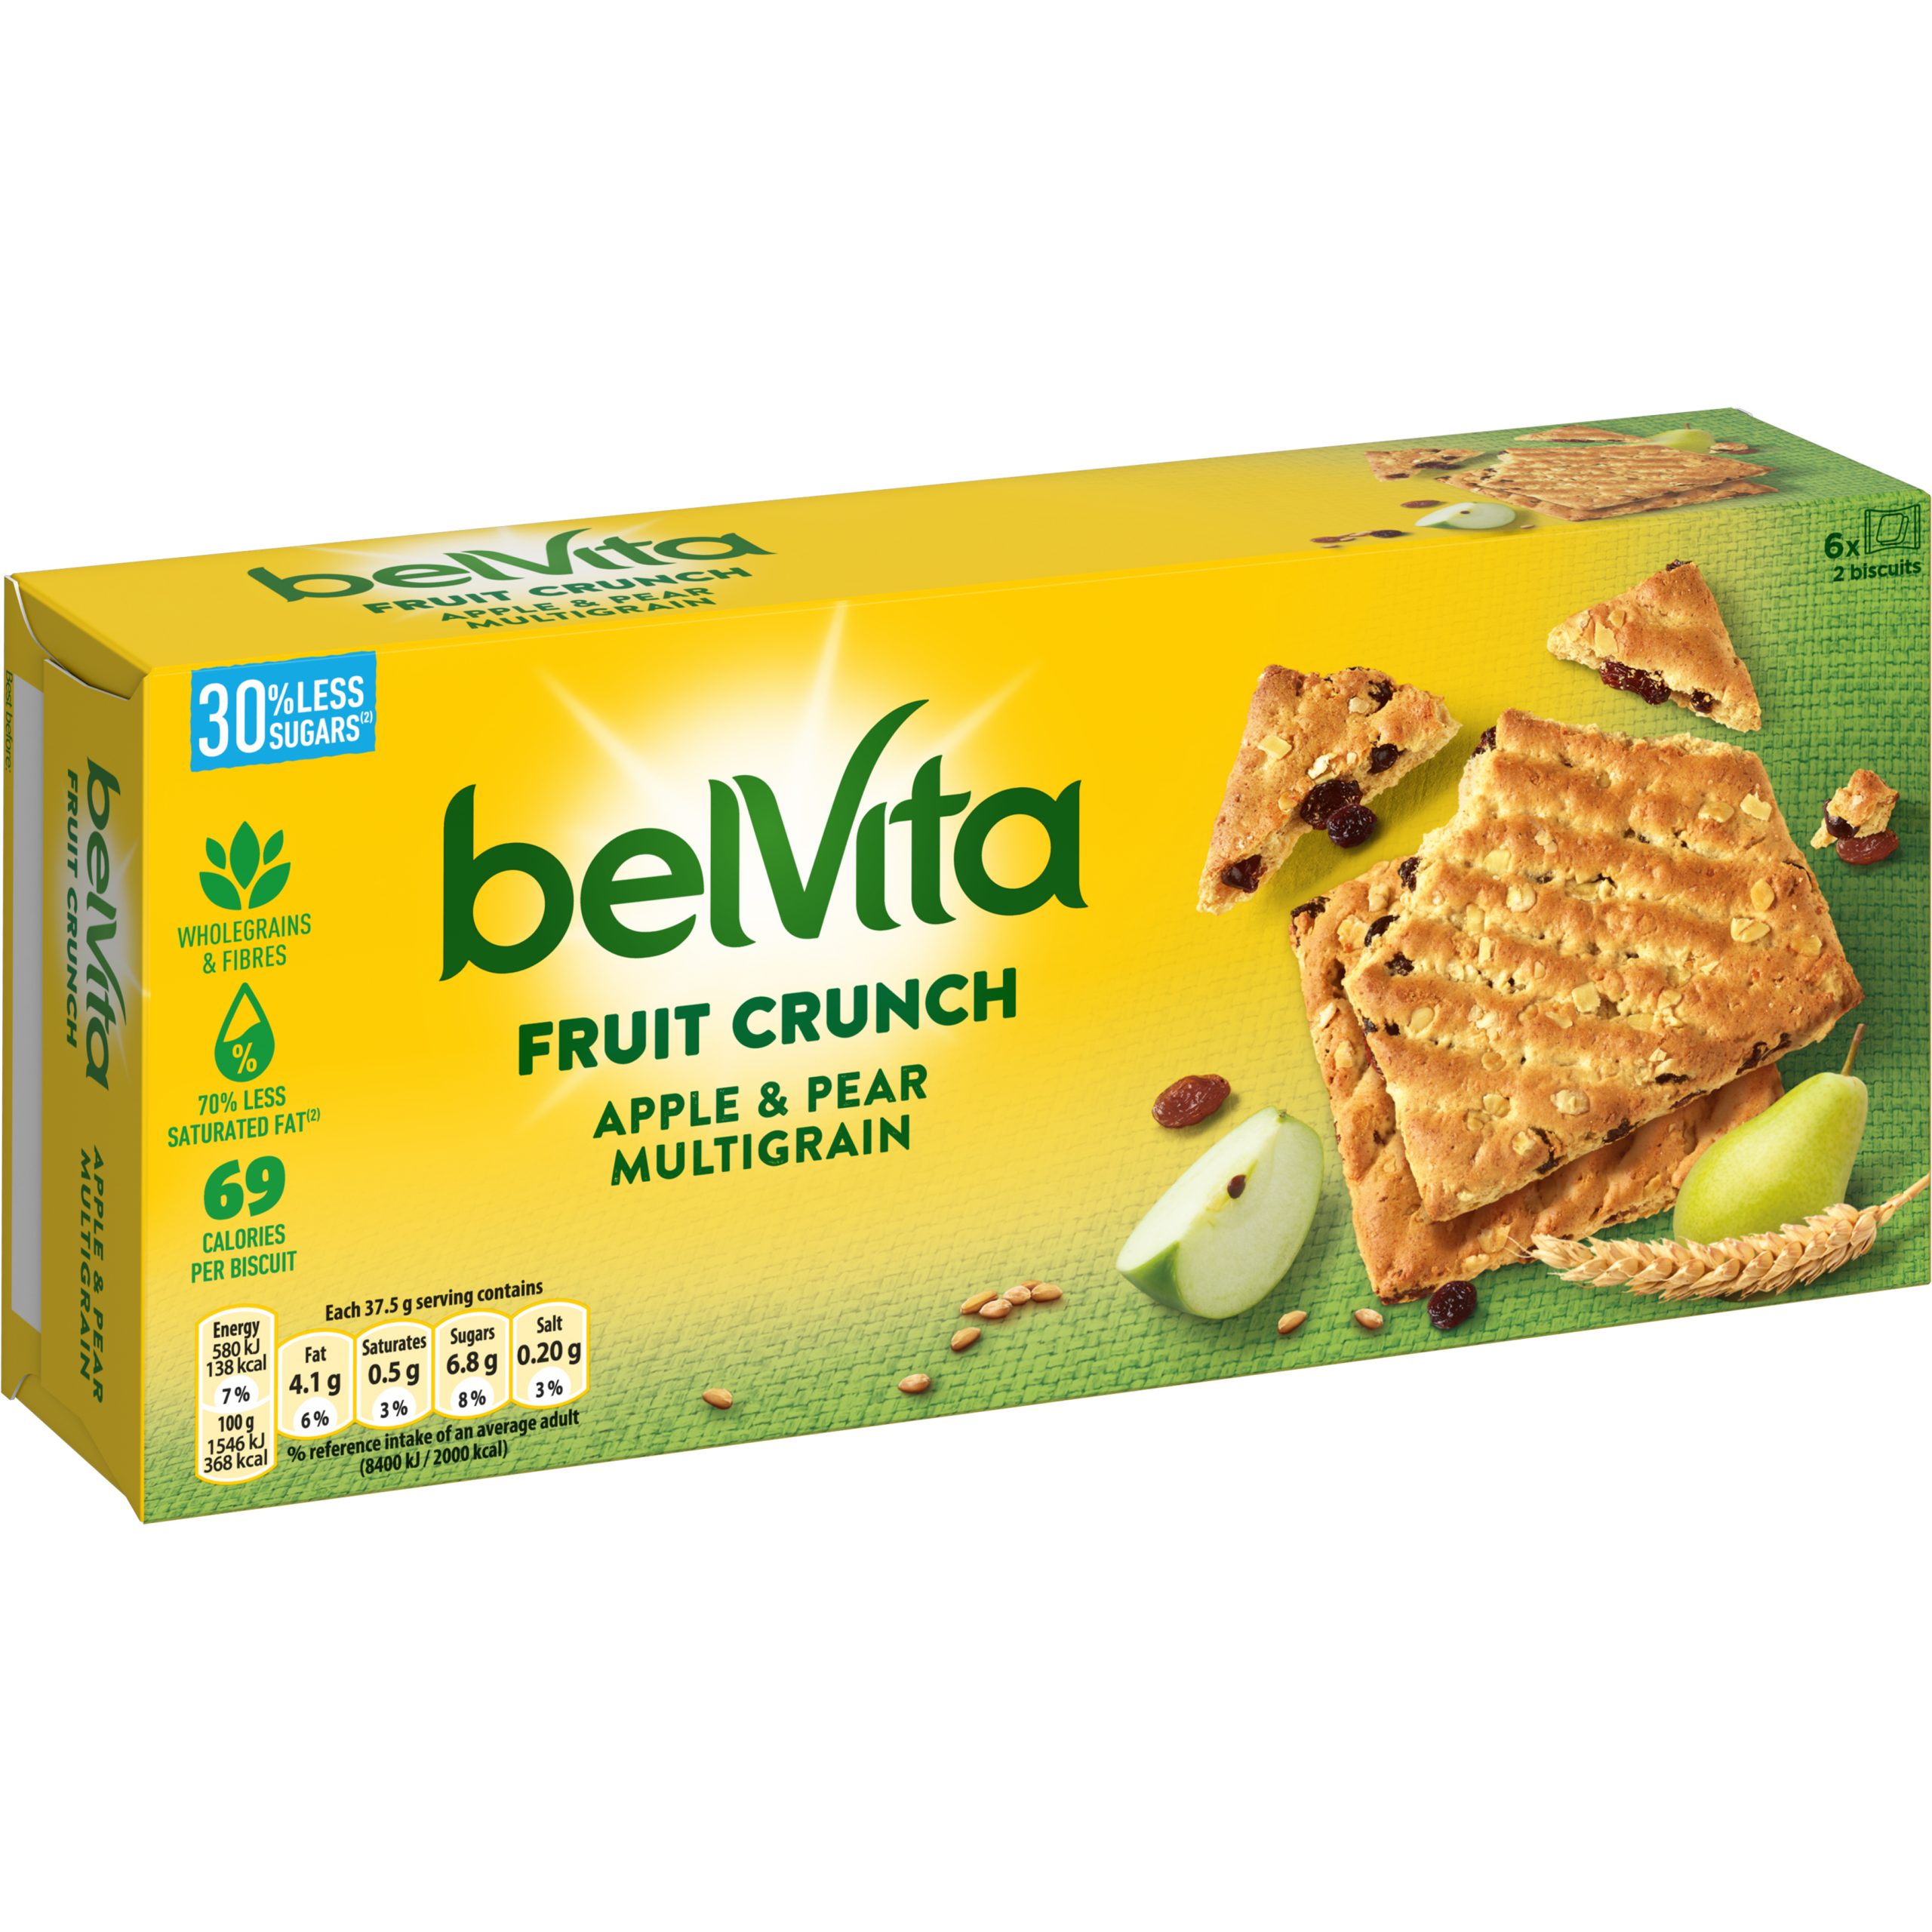 Add a crunch to your sales with new non-HFSS belVita